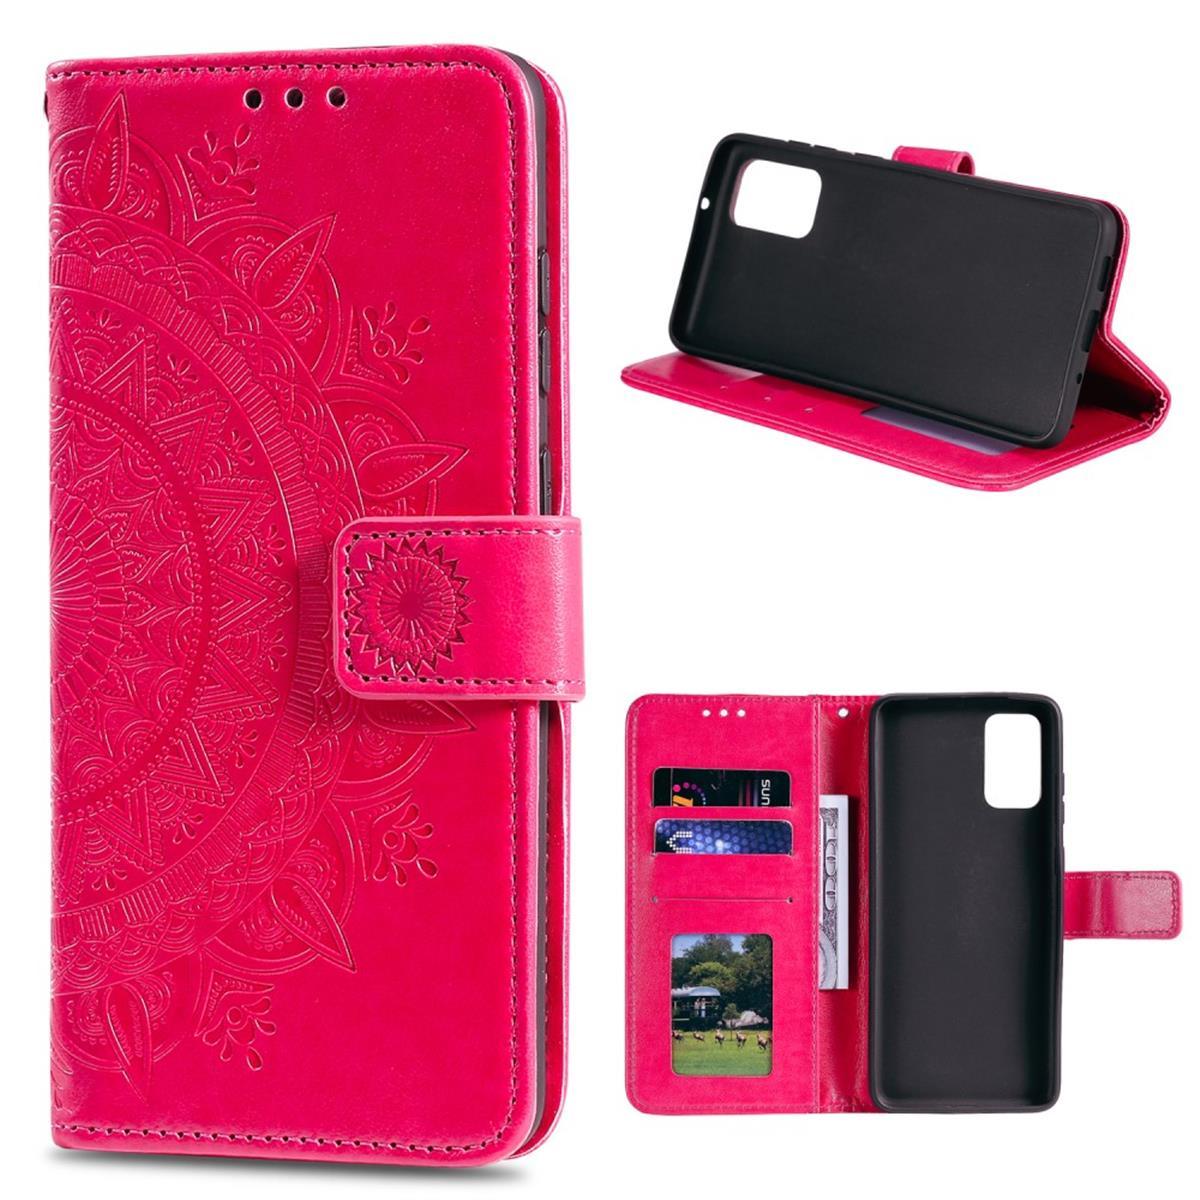 COVERKINGZ Klapphülle Mandala Bookcover, Muster, Smart Pink mit P 2021, Huawei